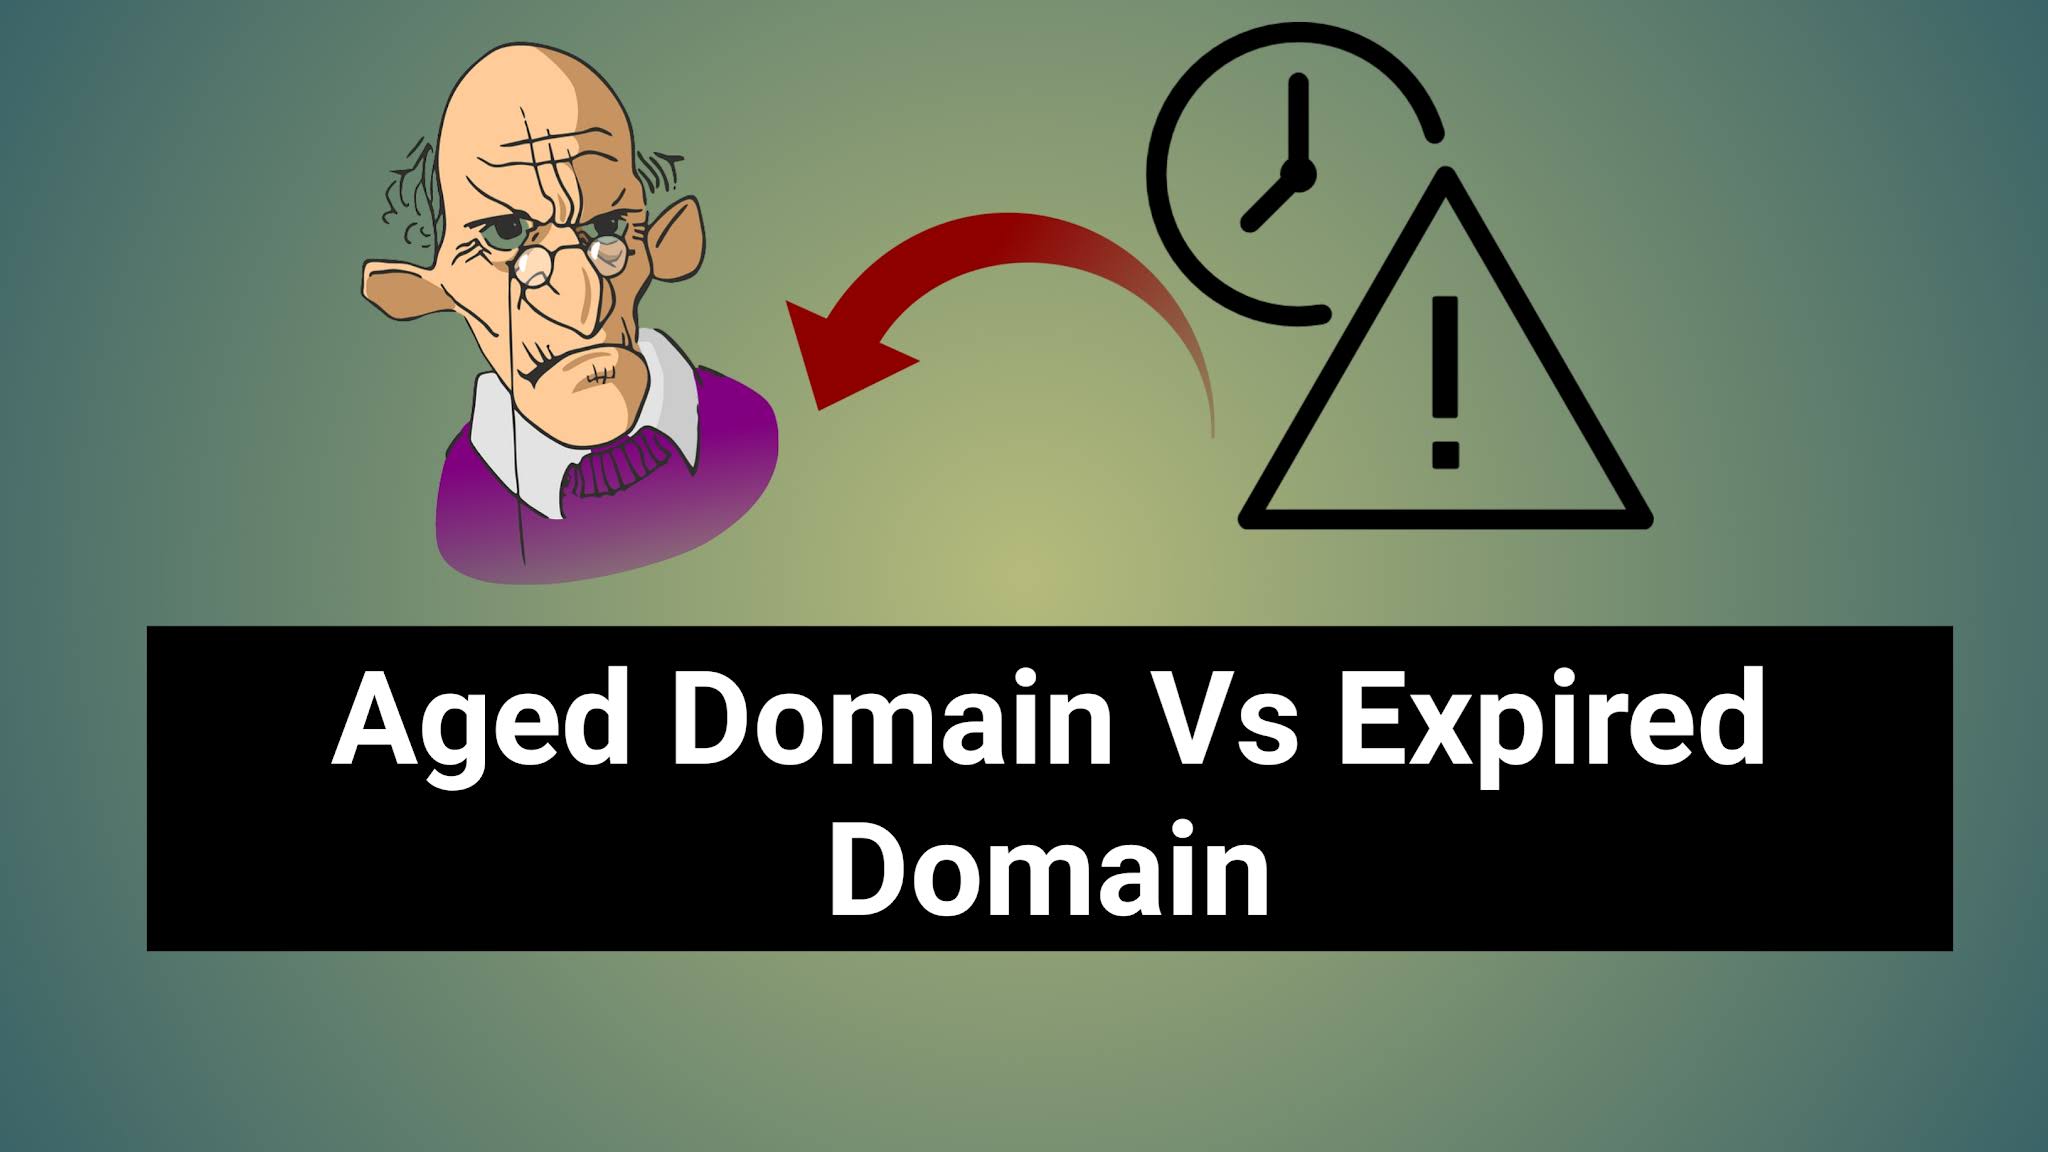 Aged Domain Vs Expired Domain - The Major Difference